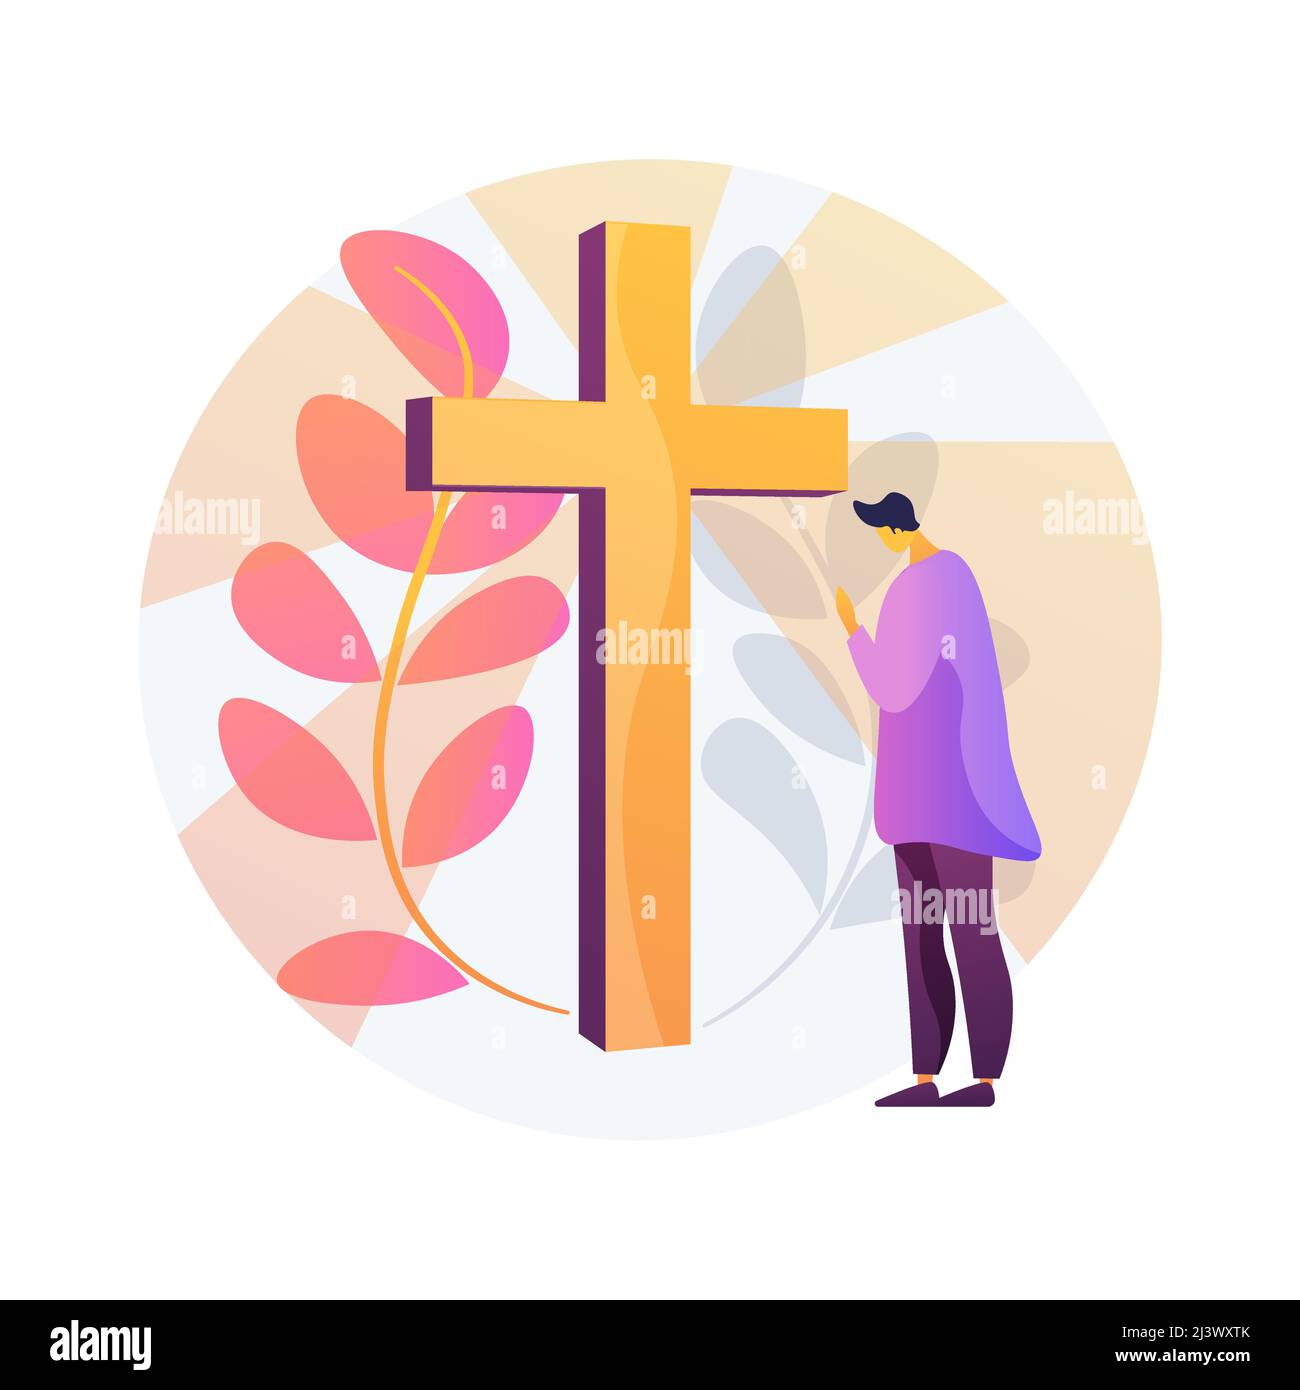 Christian event abstract concept vector illustration. Christian holy day, religious dates calendar, baptist event, church gathering, sunday mass, musi Stock Vector